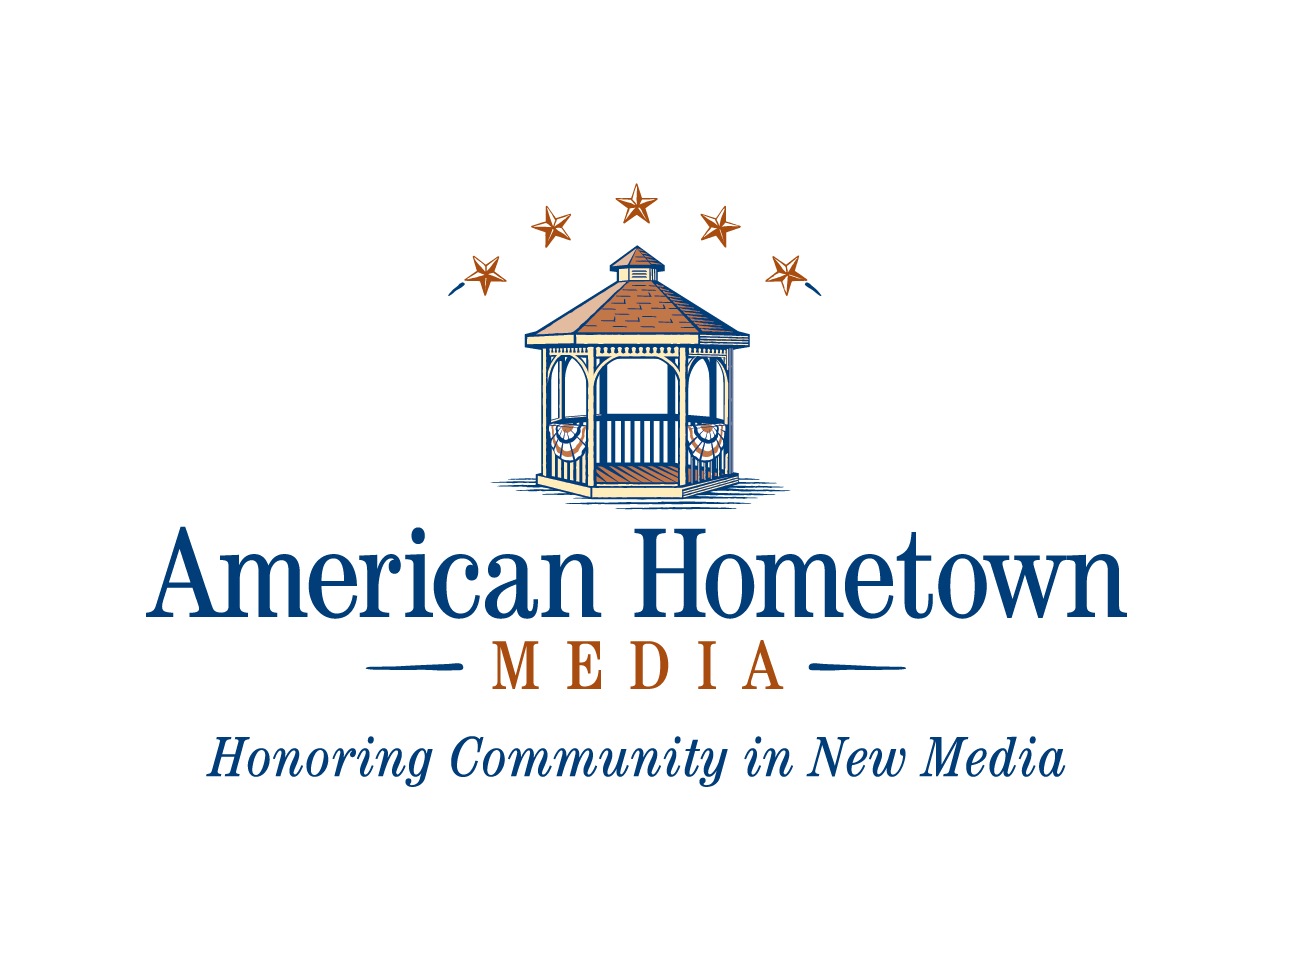 American Hometown Media Begins Aggressive Growth Strategy With Launch of CuratorCrowd™ &amp; Recipe Box Plugin™